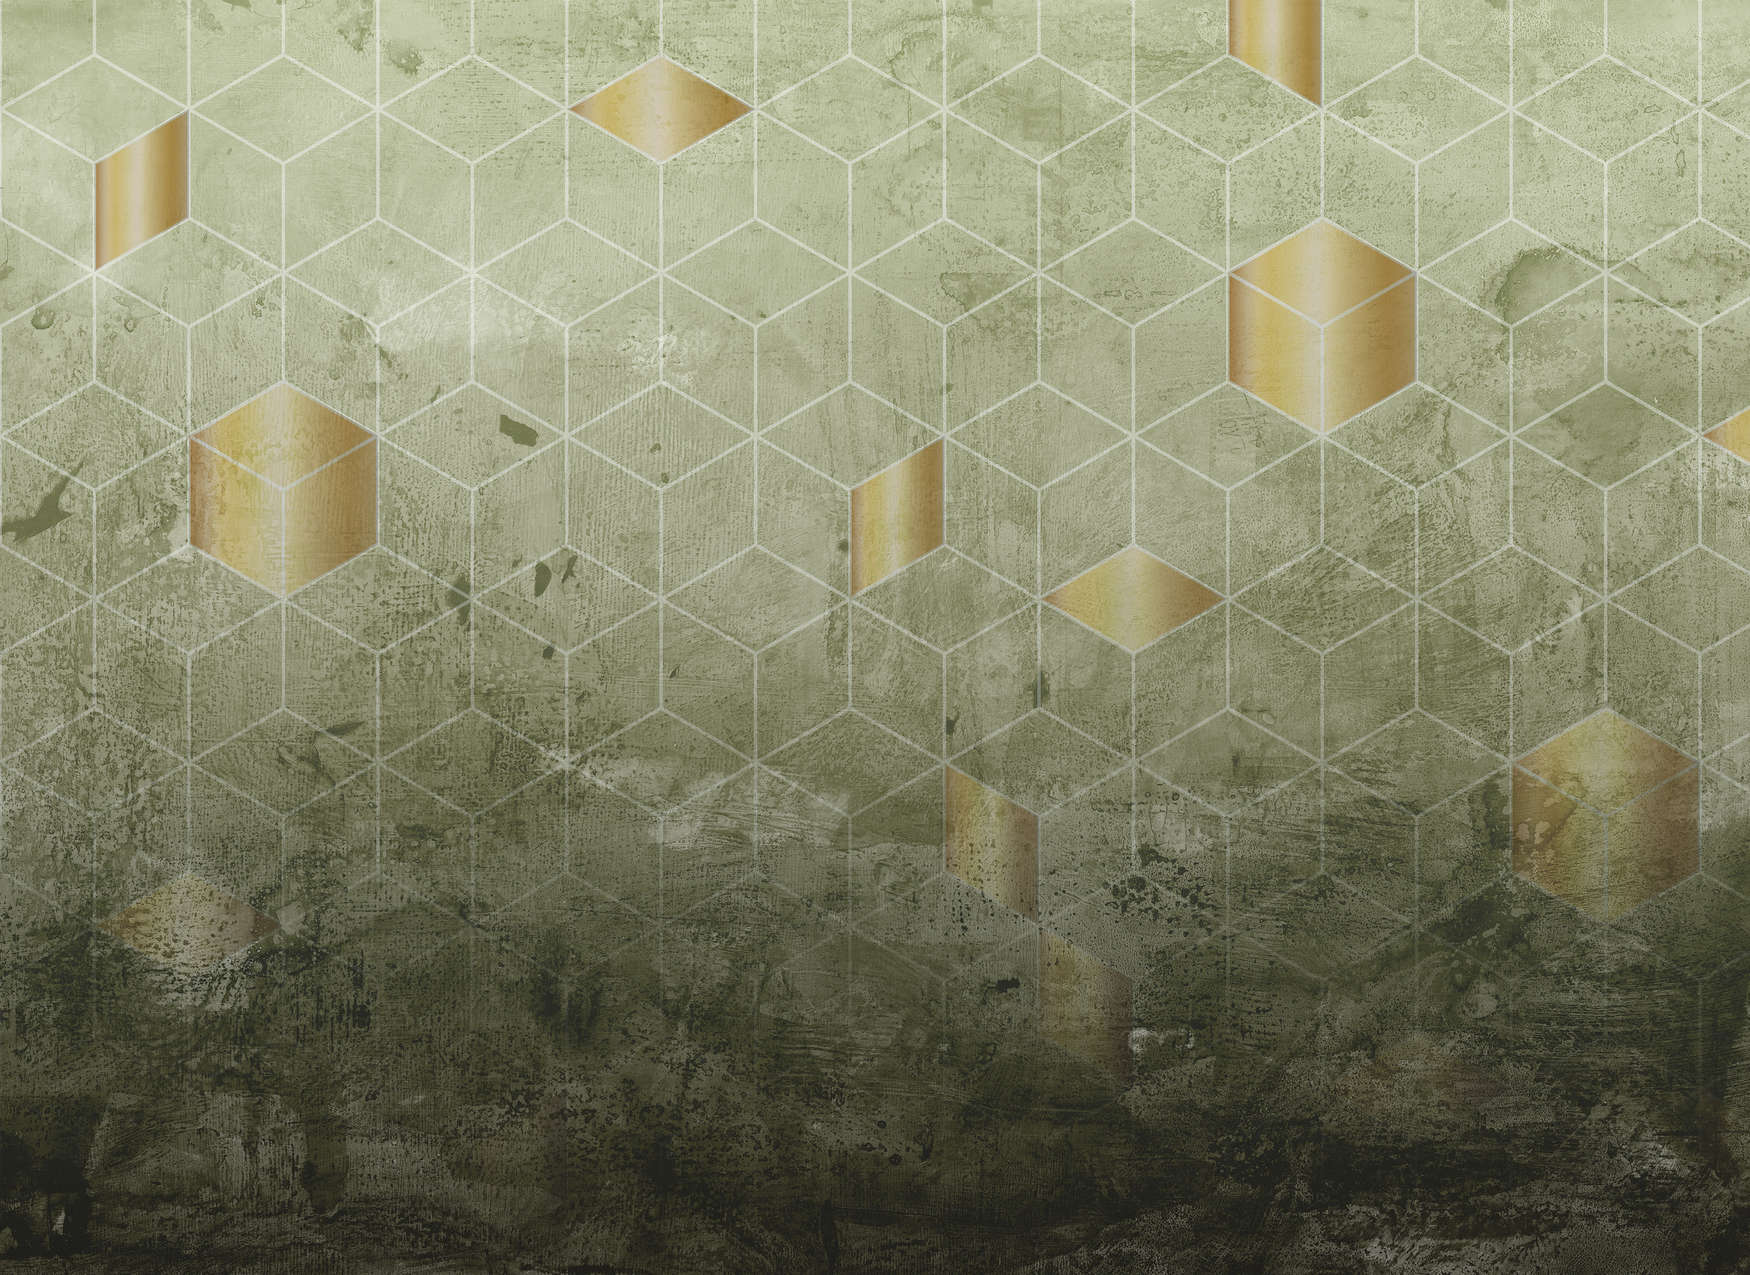             Photo wallpaper square pattern with 3D effect - green, gold
        